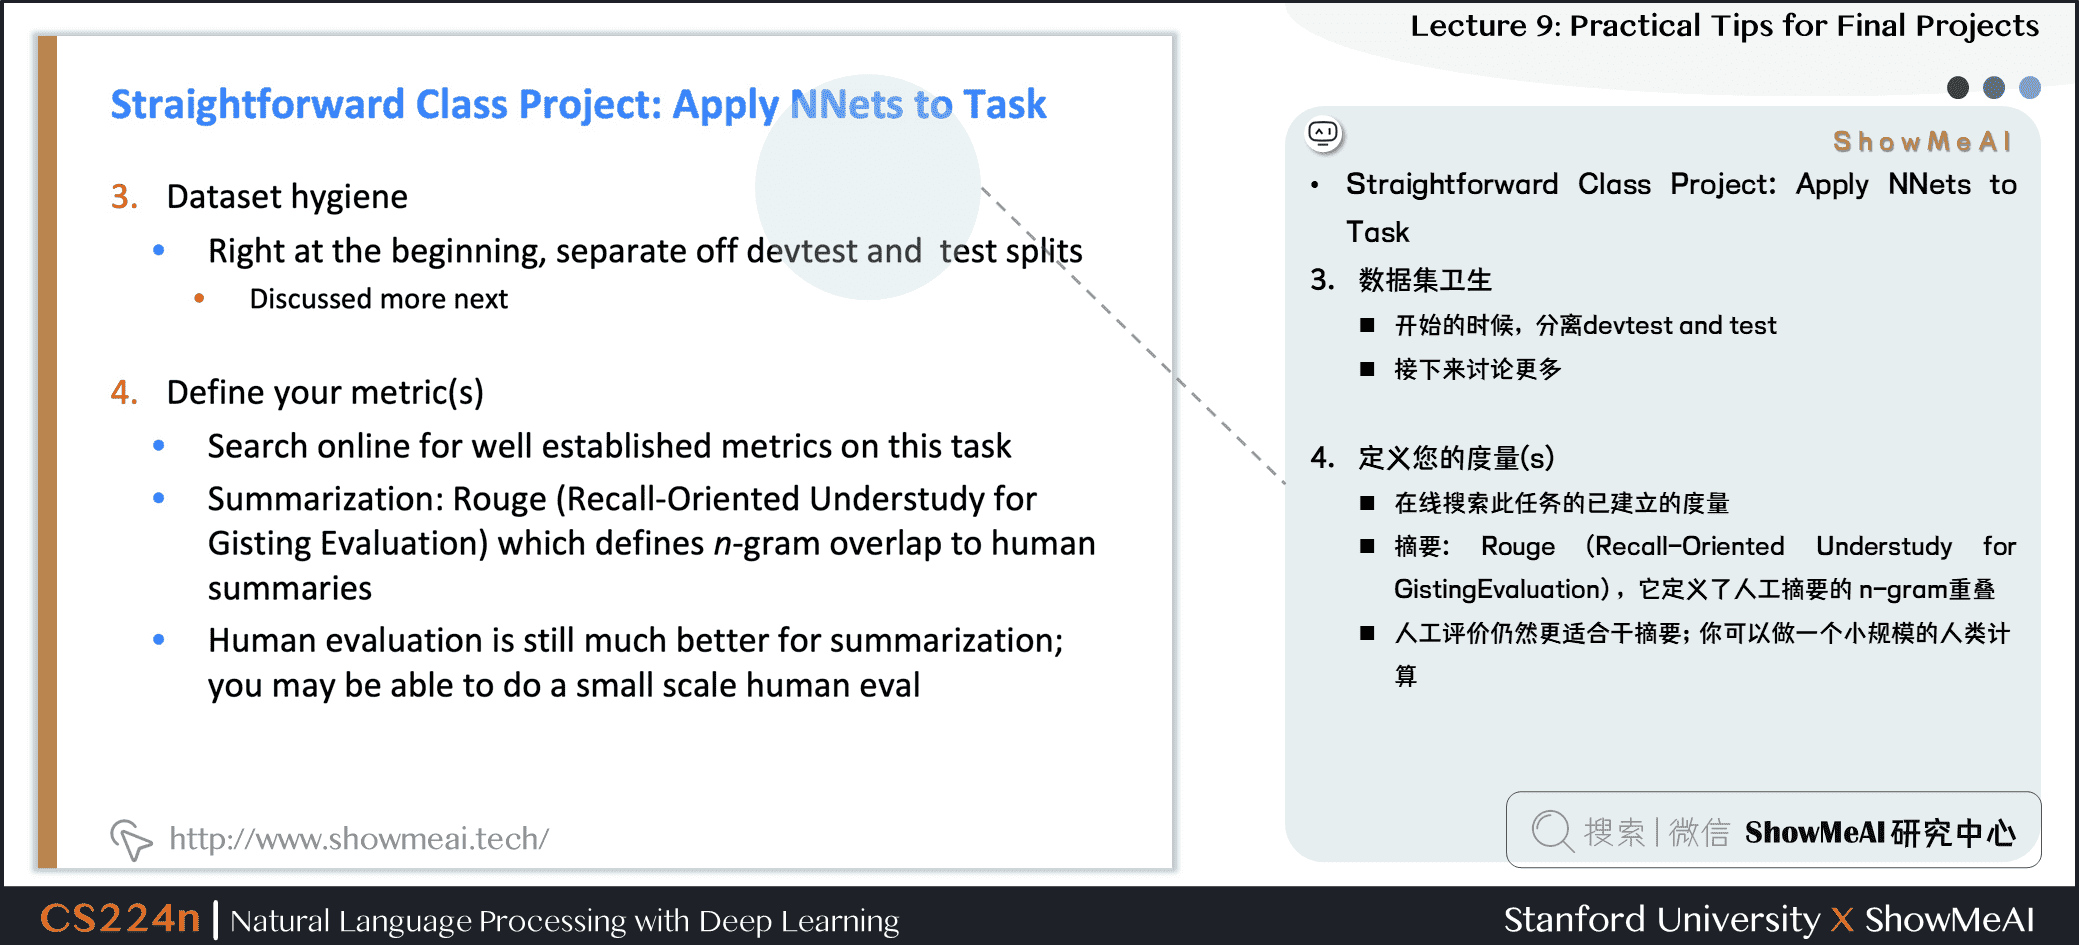 Straightforward Class Project: Apply NNets to Task